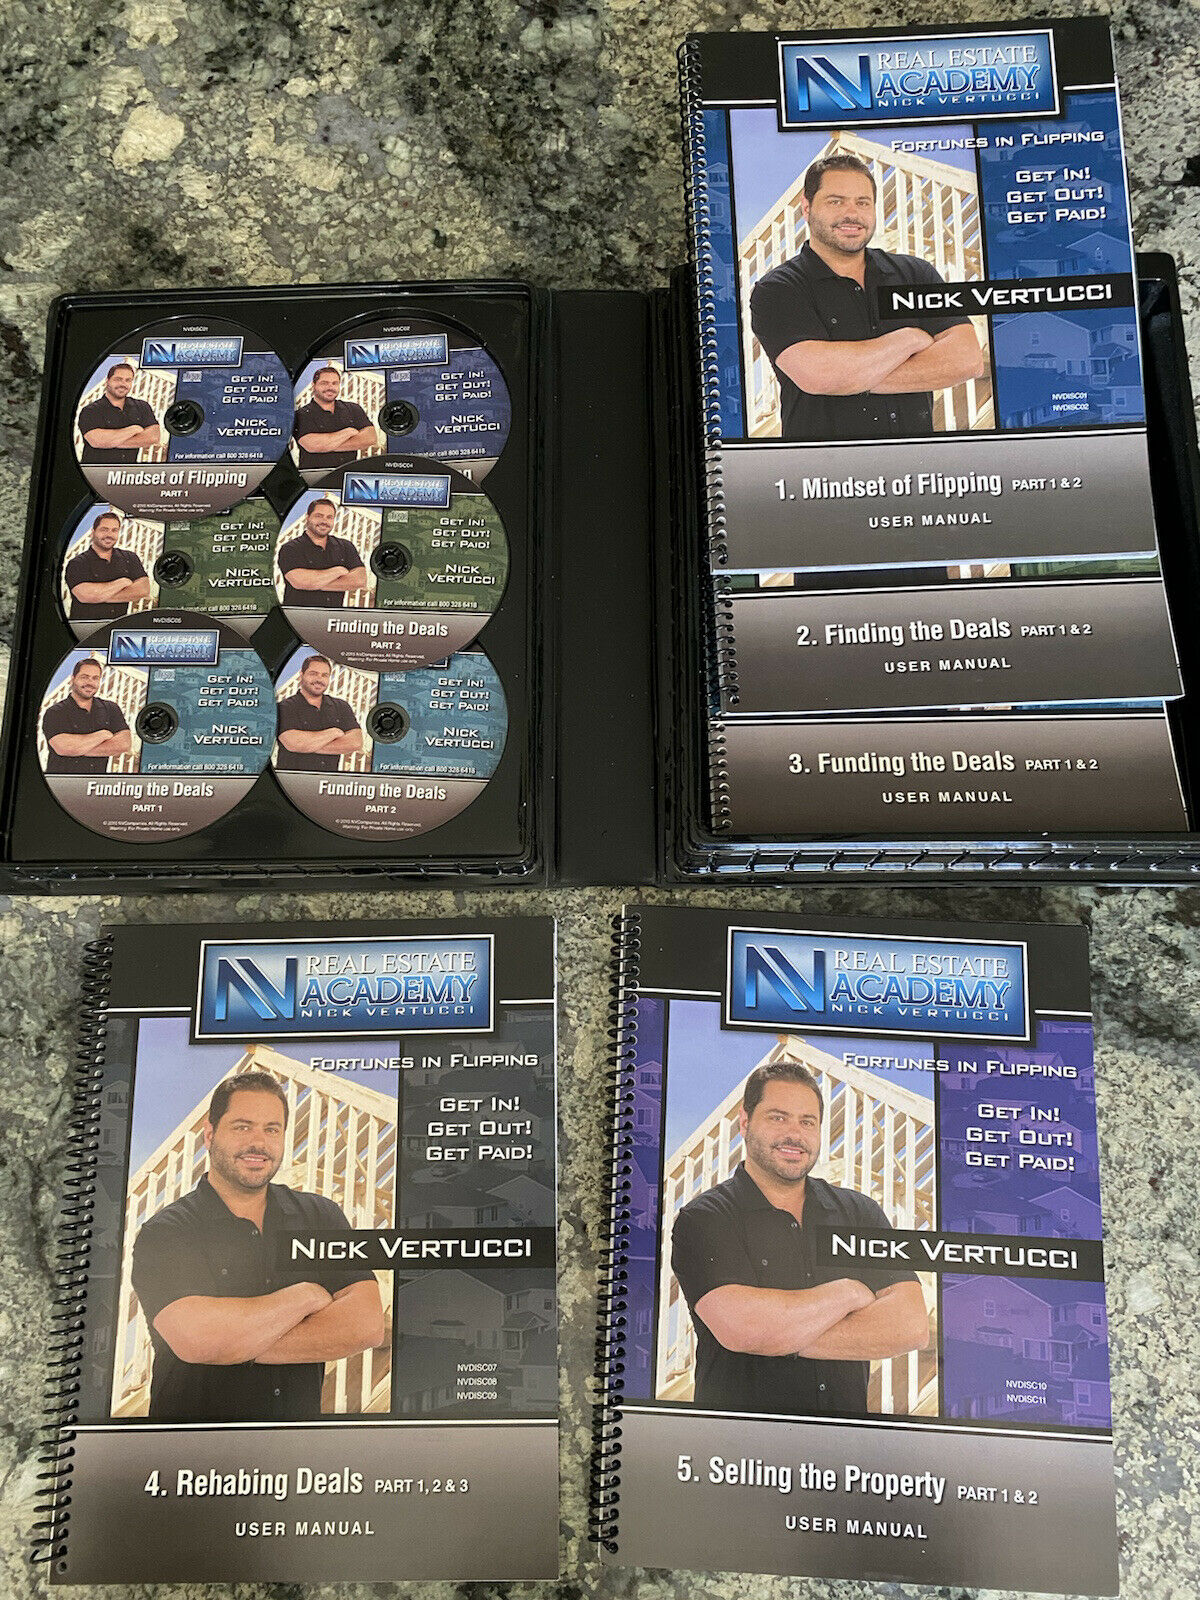 Nick Vertucci Real Estate Academy Fortunes In Flipping 11 Cds & Books Course Kit